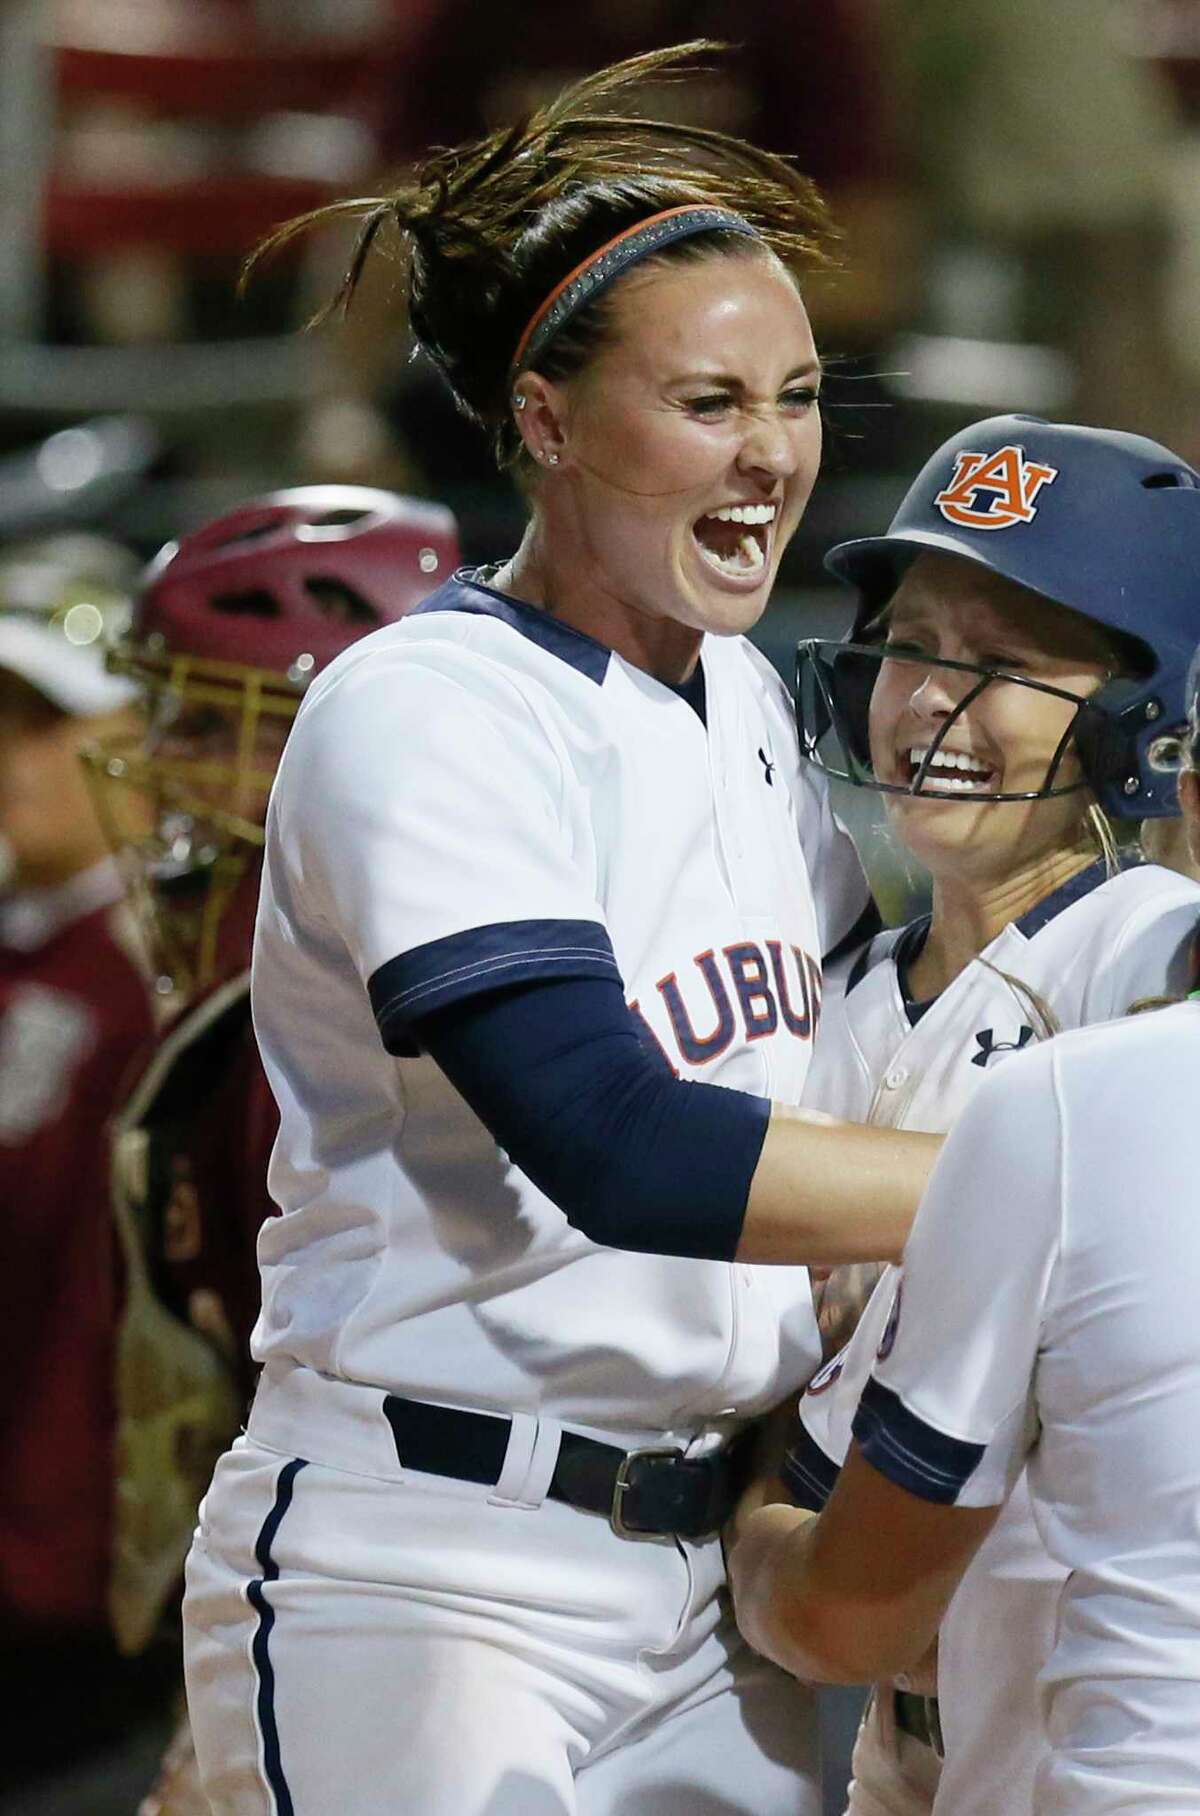 FILE - In this June 5, 2016, file photo, Auburn infielder Haley Fagan, left, and outfielder Morgan Podany celebrate Podany's game winning run against Florida State in the eighth inning of an NCAA Women's College World Series softball game in Oklahoma City. Florida softball coach Tim Walton was involved in an altercation with Auburn shortstop Haley Fagan on Monday night, March 27, 2017, after Walton gave Fagan a slight push during postgame handshakes. (AP Photo/Sue Ogrocki, File)